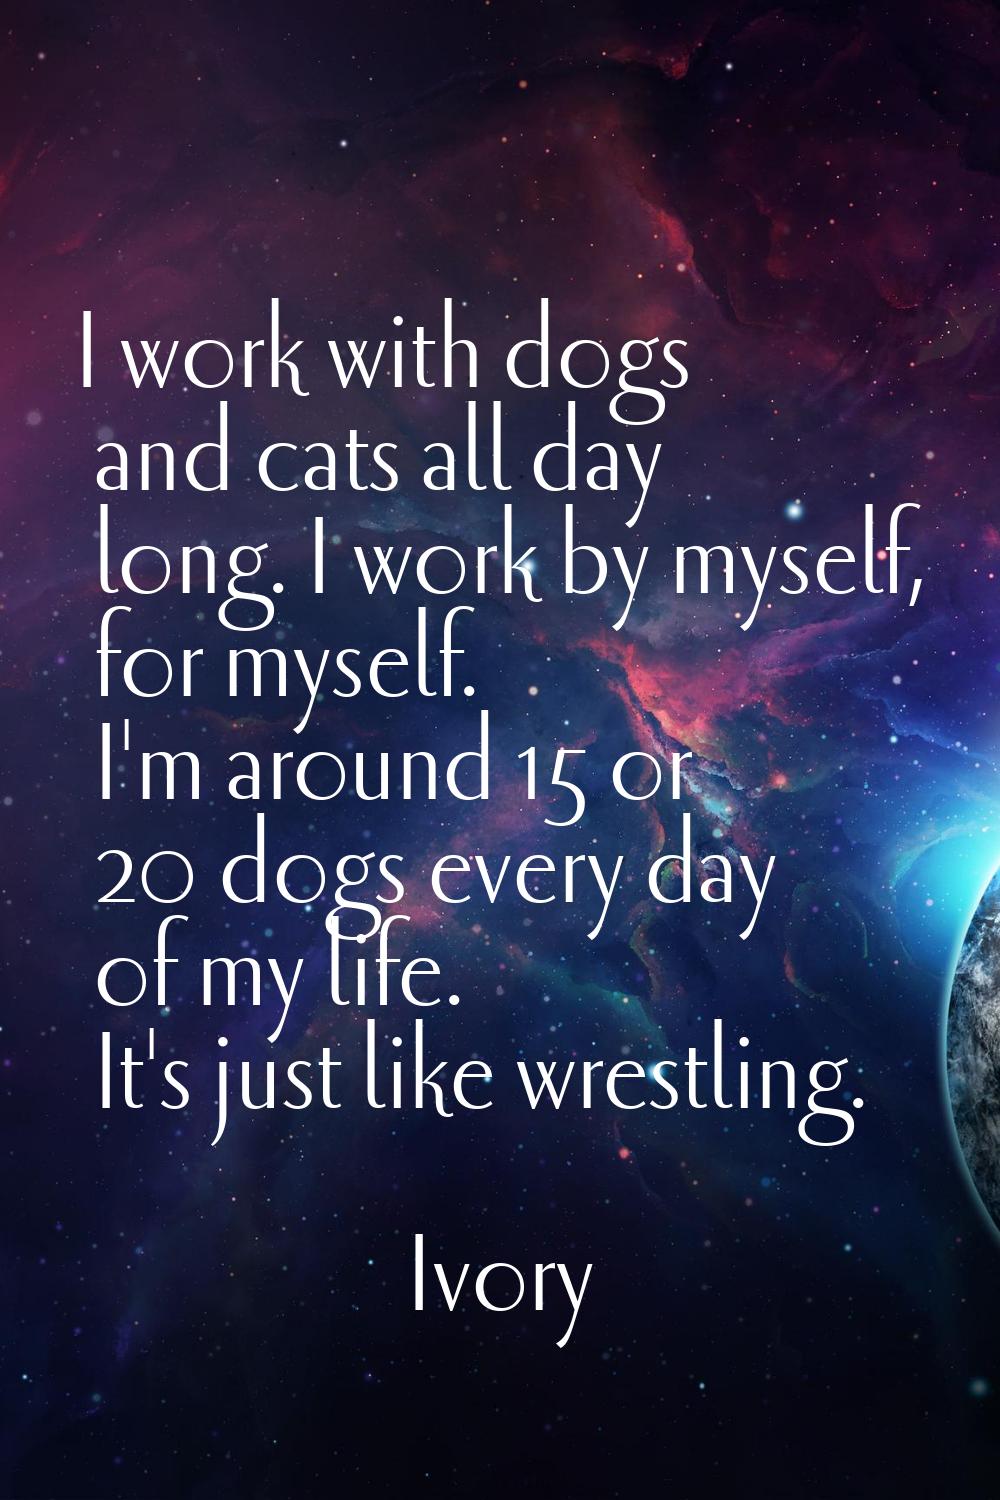 I work with dogs and cats all day long. I work by myself, for myself. I'm around 15 or 20 dogs ever